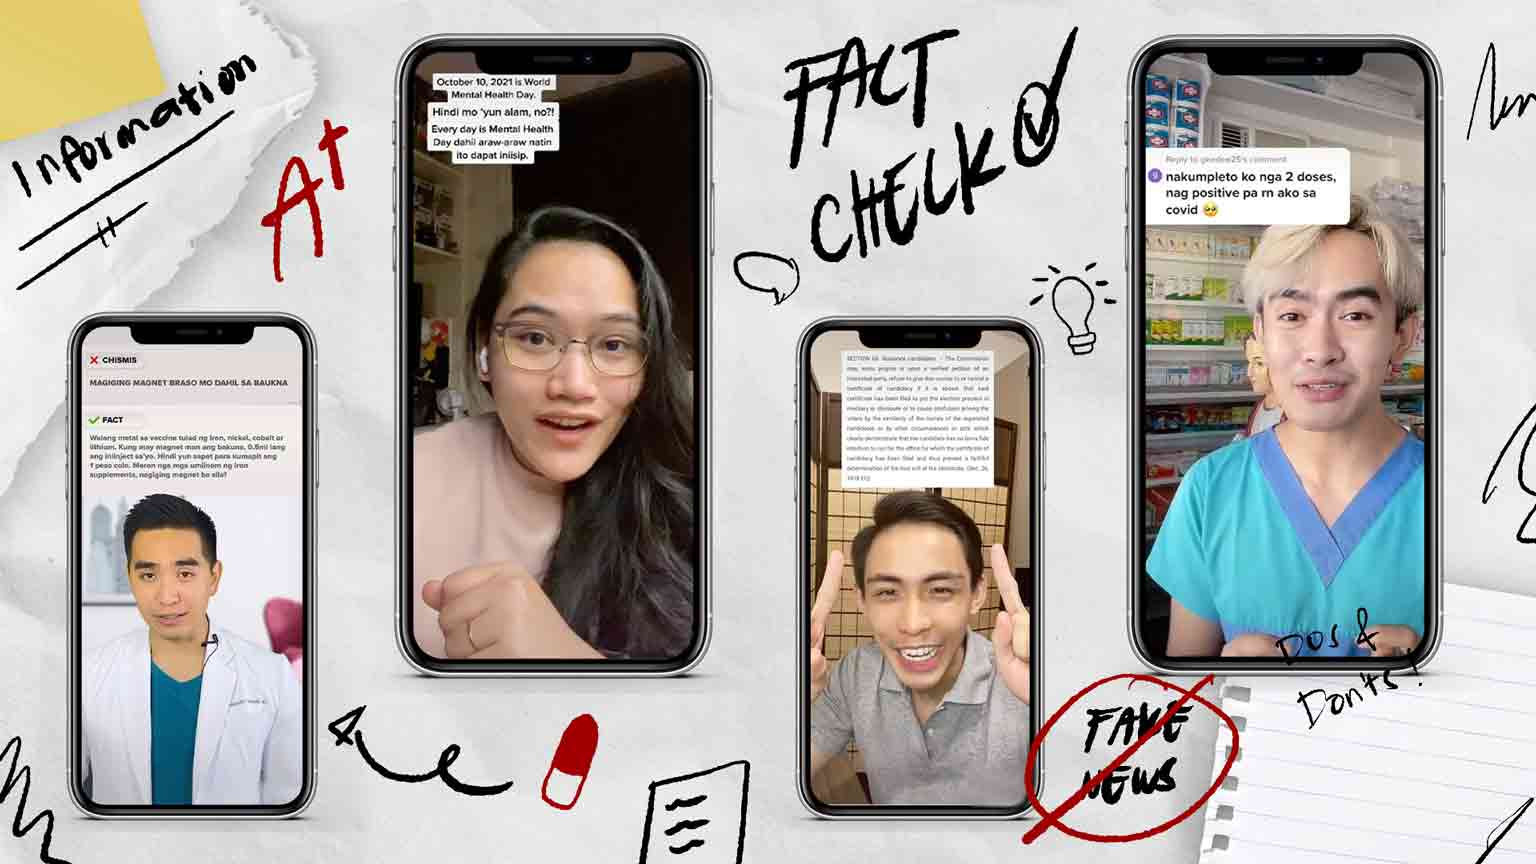 THESE CONTENT CREATORS ARE FIGHTING MISINFORMATION, ONE TIKTOK AT A TIME